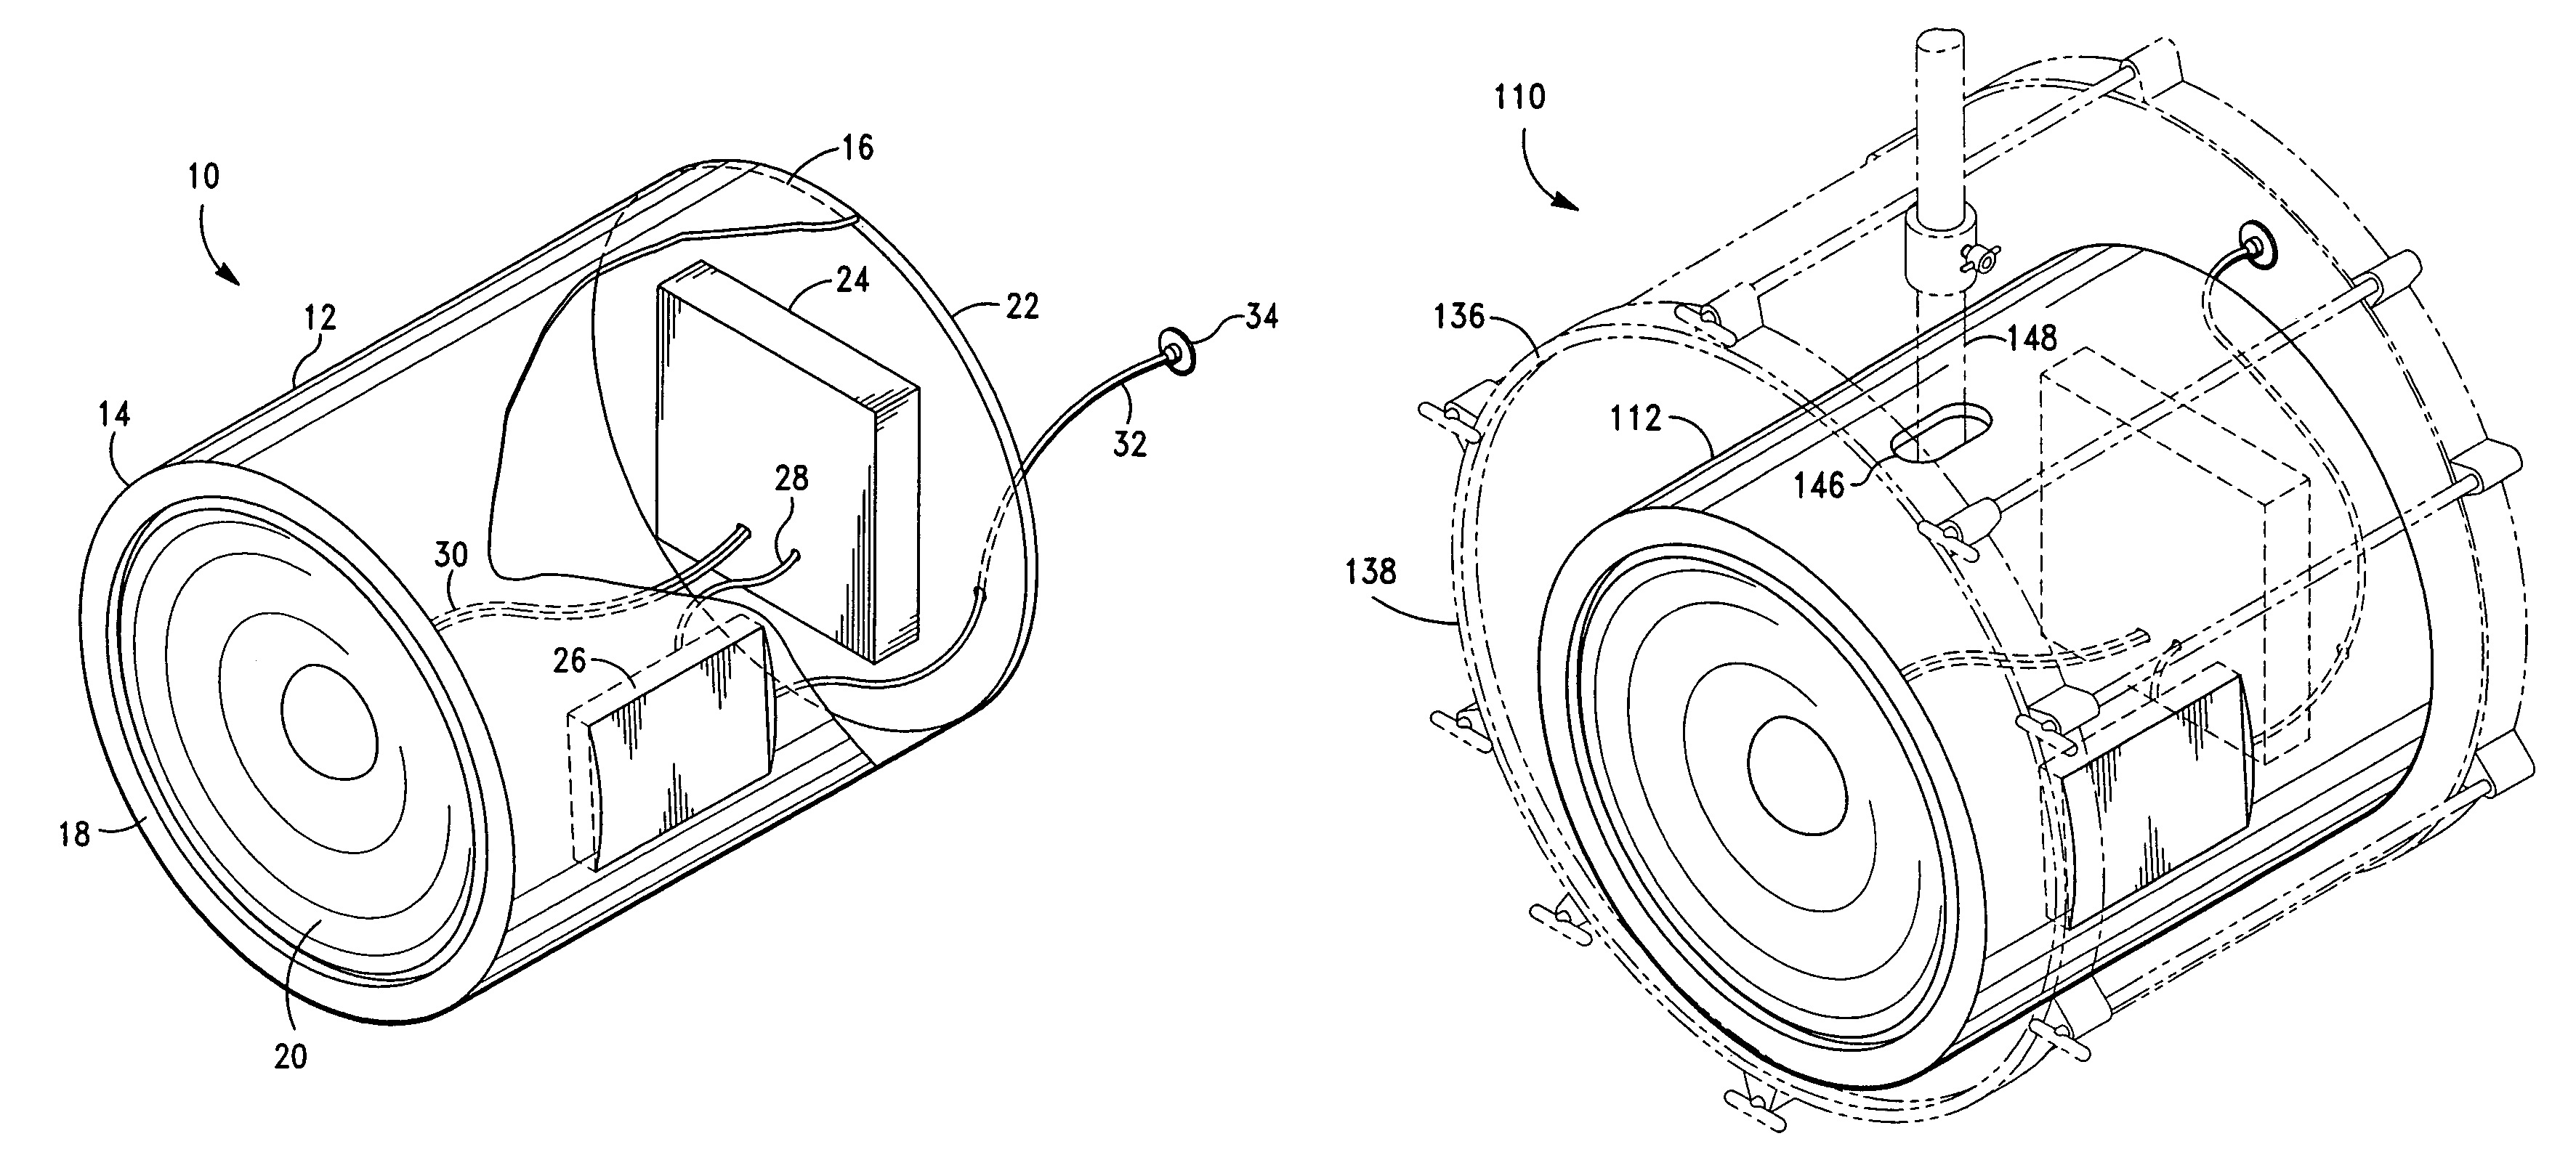 Sound augmentation system and method for a drum